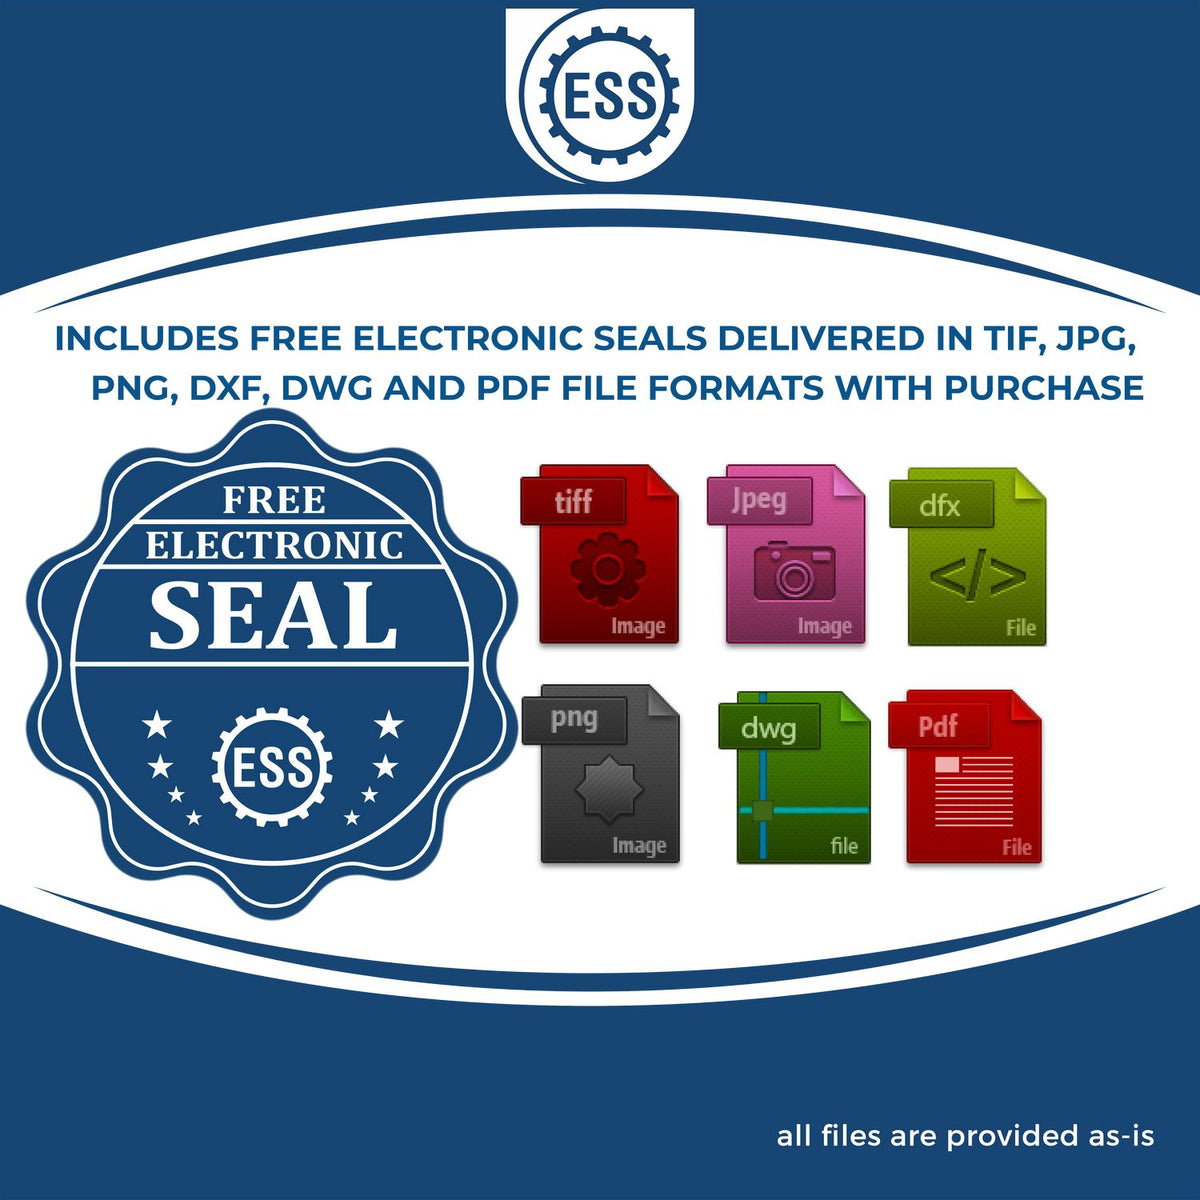 An infographic for the free electronic seal for the Extended Long Reach Florida Surveyor Embosser illustrating the different file type icons such as DXF, DWG, TIF, JPG and PNG.